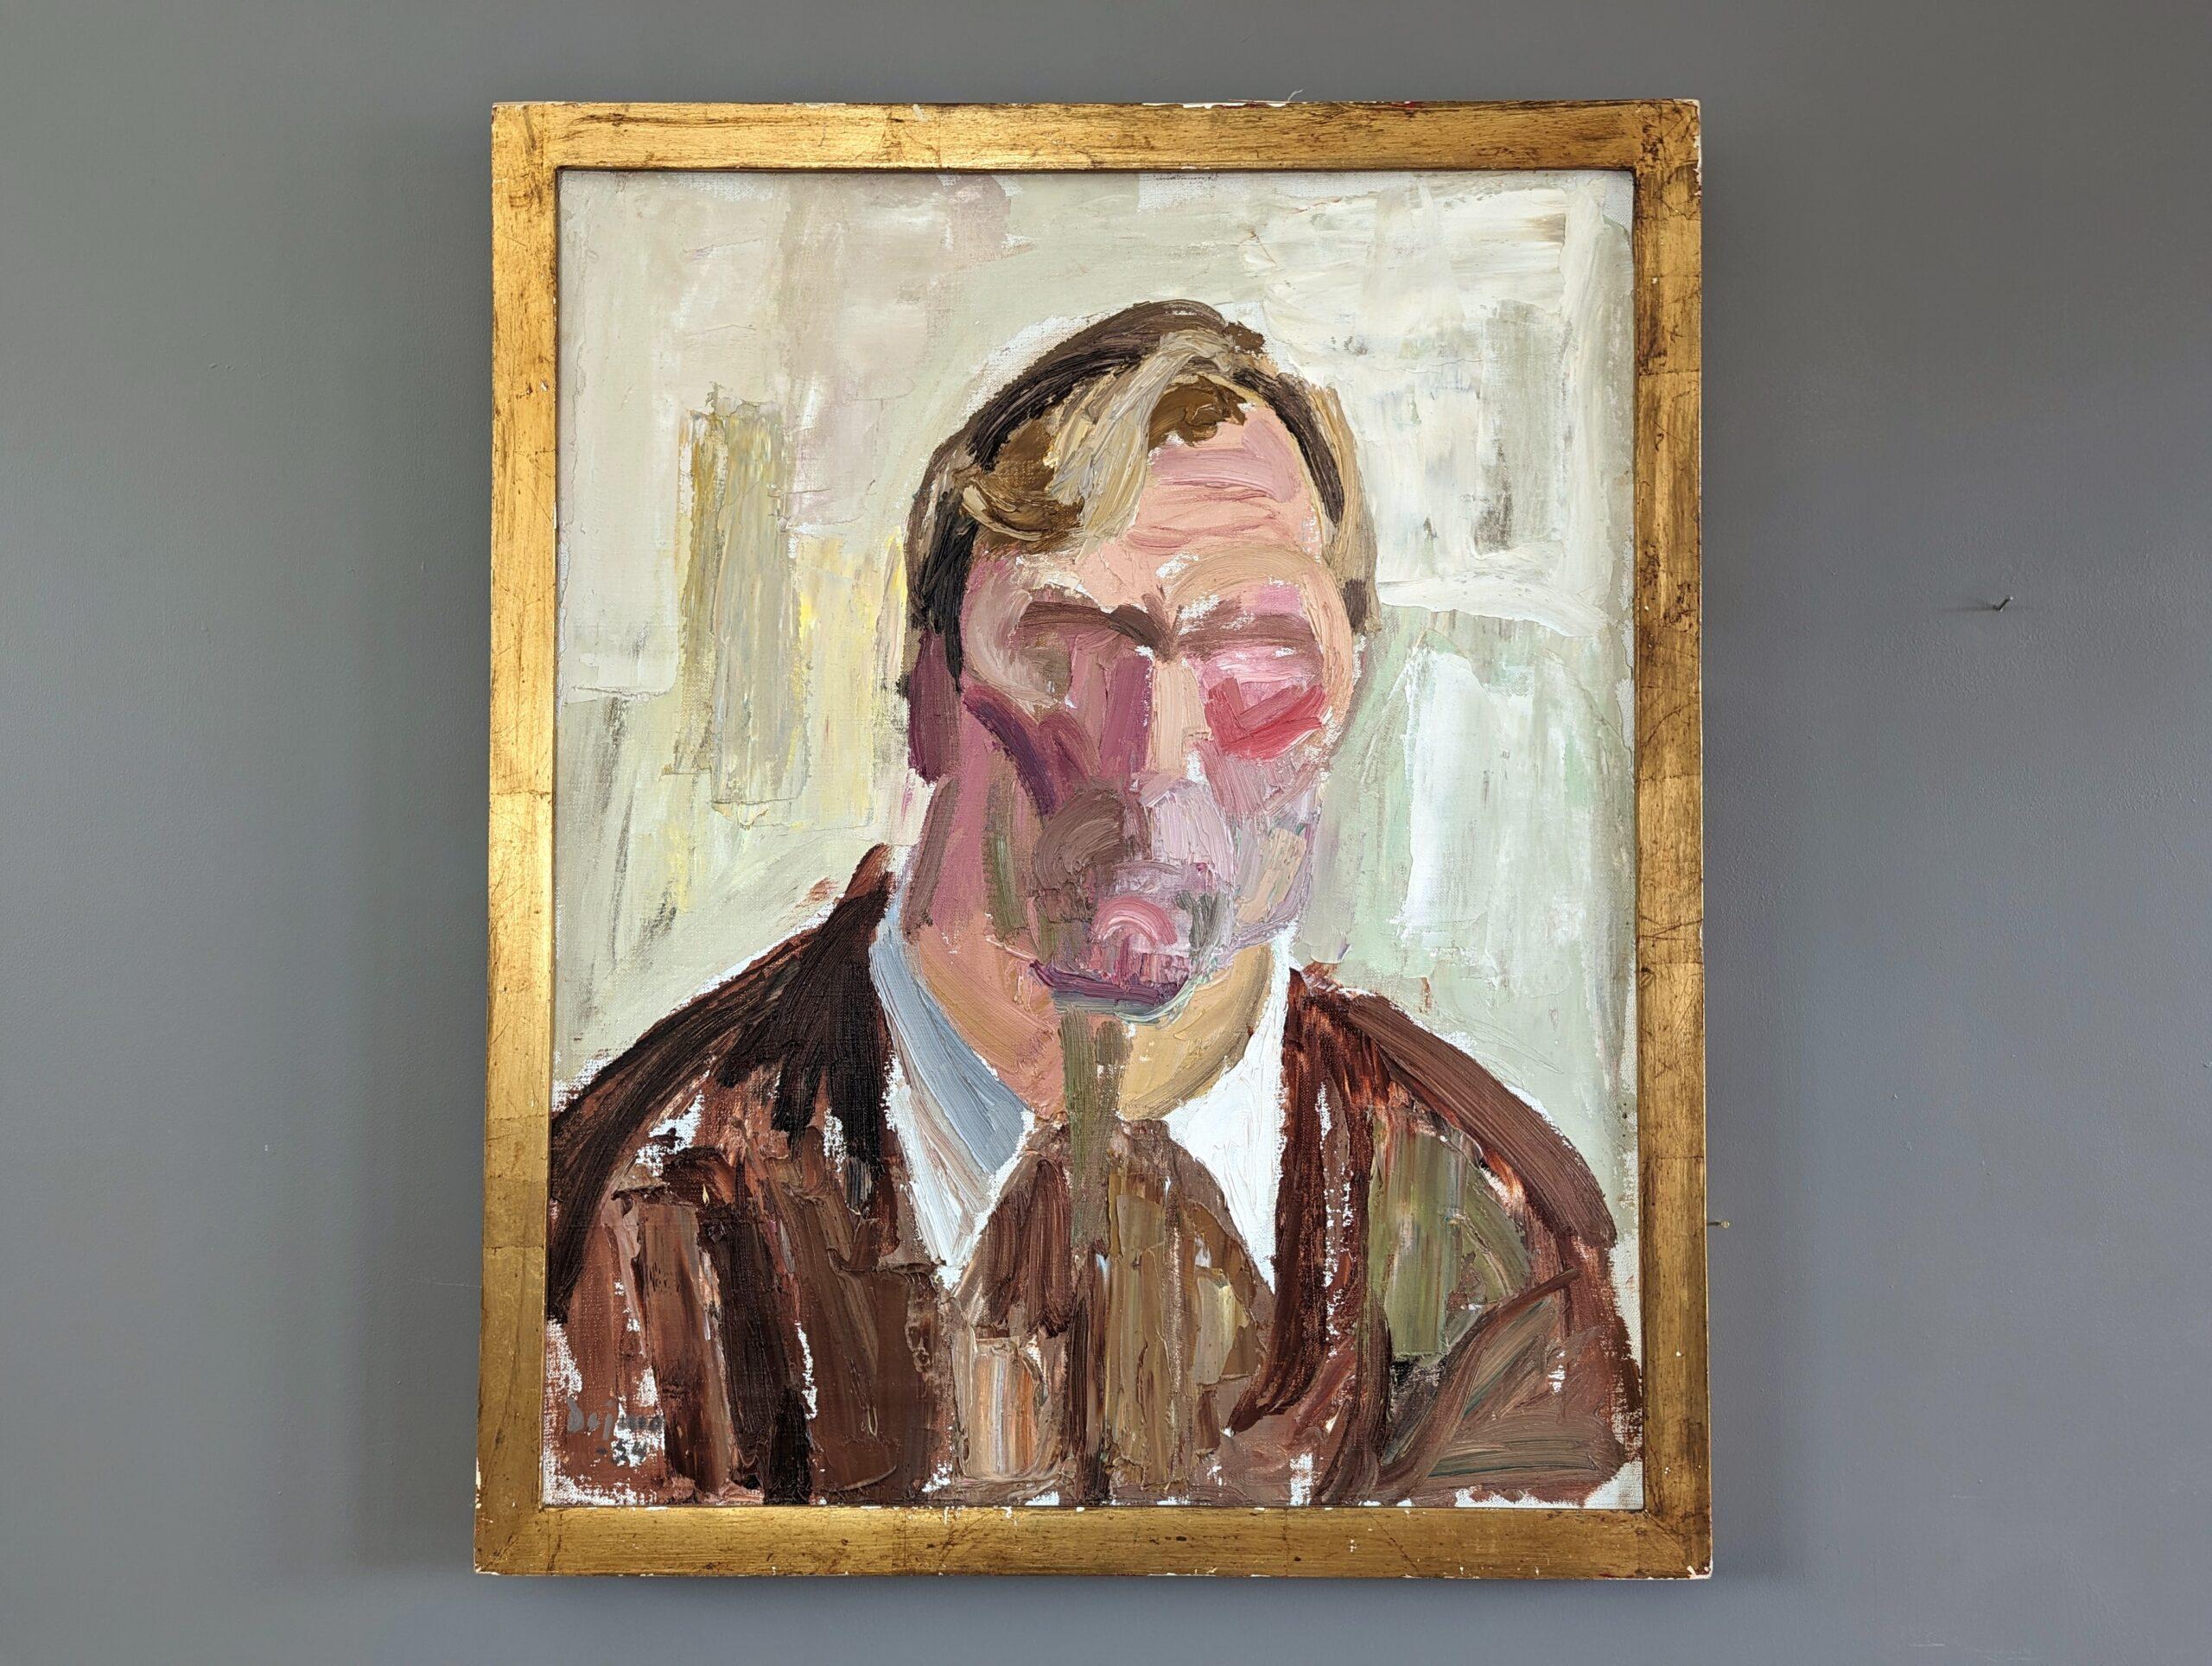 PORTRAIT OF A TROUBLED SOUL
Size: 65.5 x 54 cm (including frame)
Oil on Canvas

This mid-century expressive and emotive oil portrait delves into the depths of the human psyche with an intriguing depiction of a male figure in a brown shirt.

The face